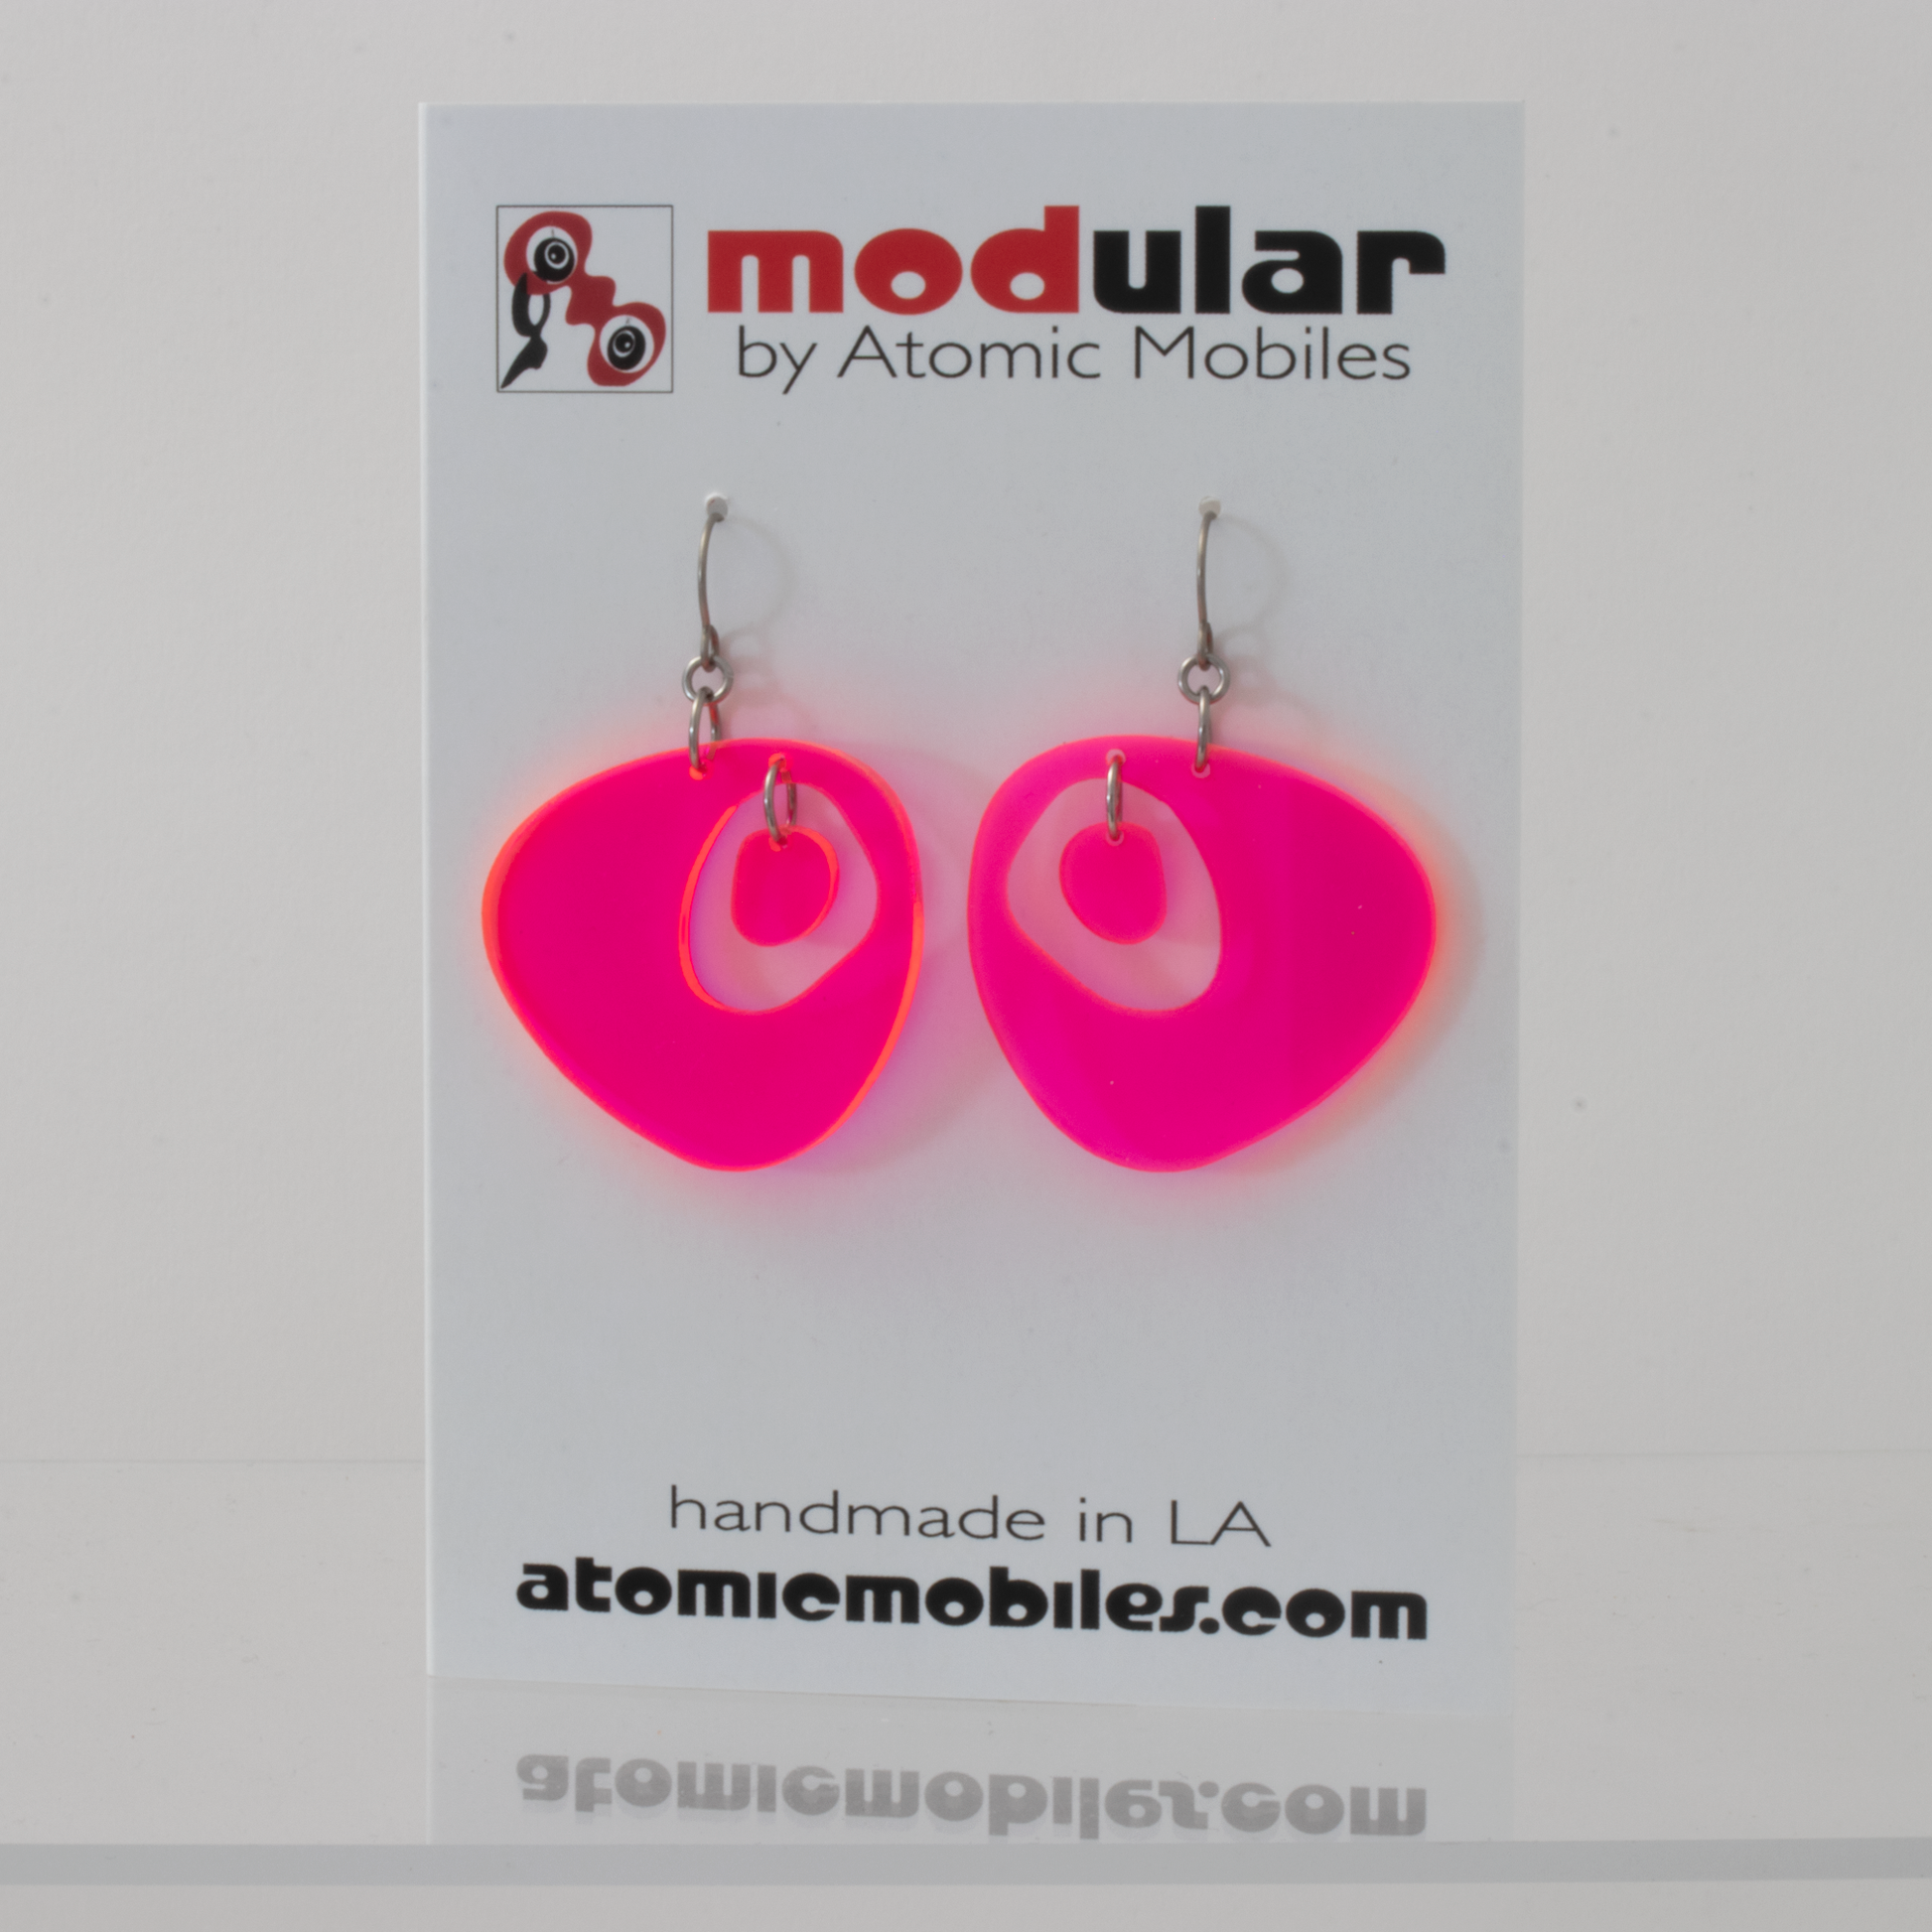 Googie 1970s Mid Century Modern Style Earrings in Neon Fluorescent Hot Pink plexiglass acrylic by AtomicMobiles.com